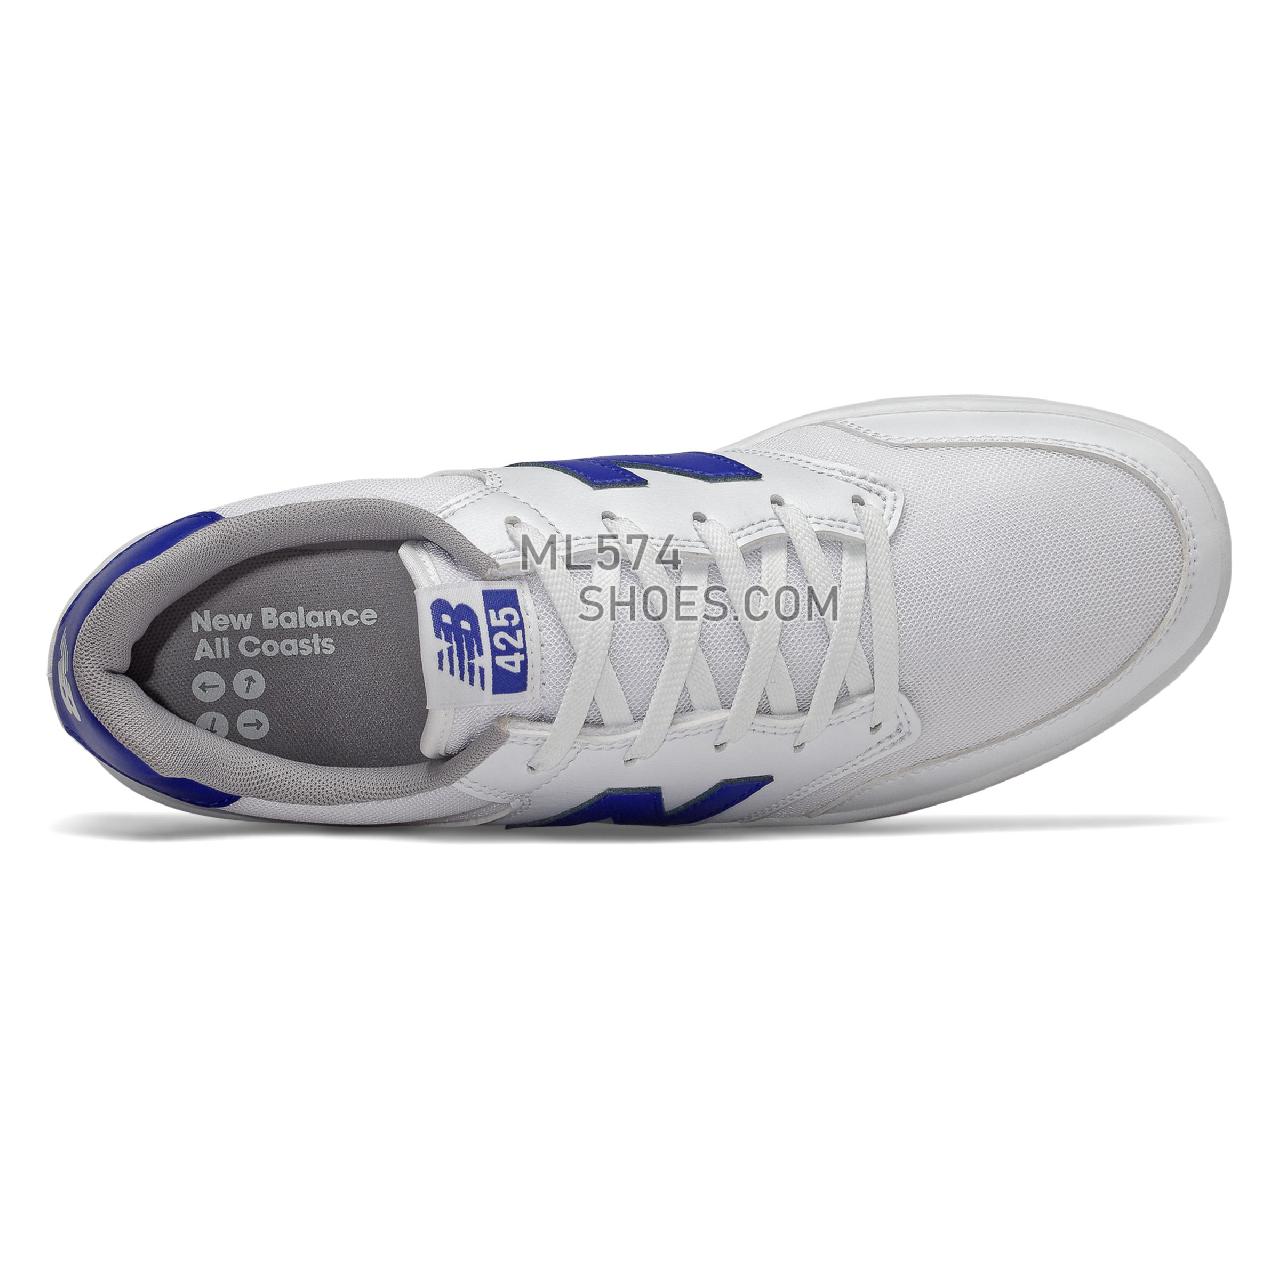 New Balance All Coasts 425 - Men's Court Classics - White with Royal Blue - AM425WHB